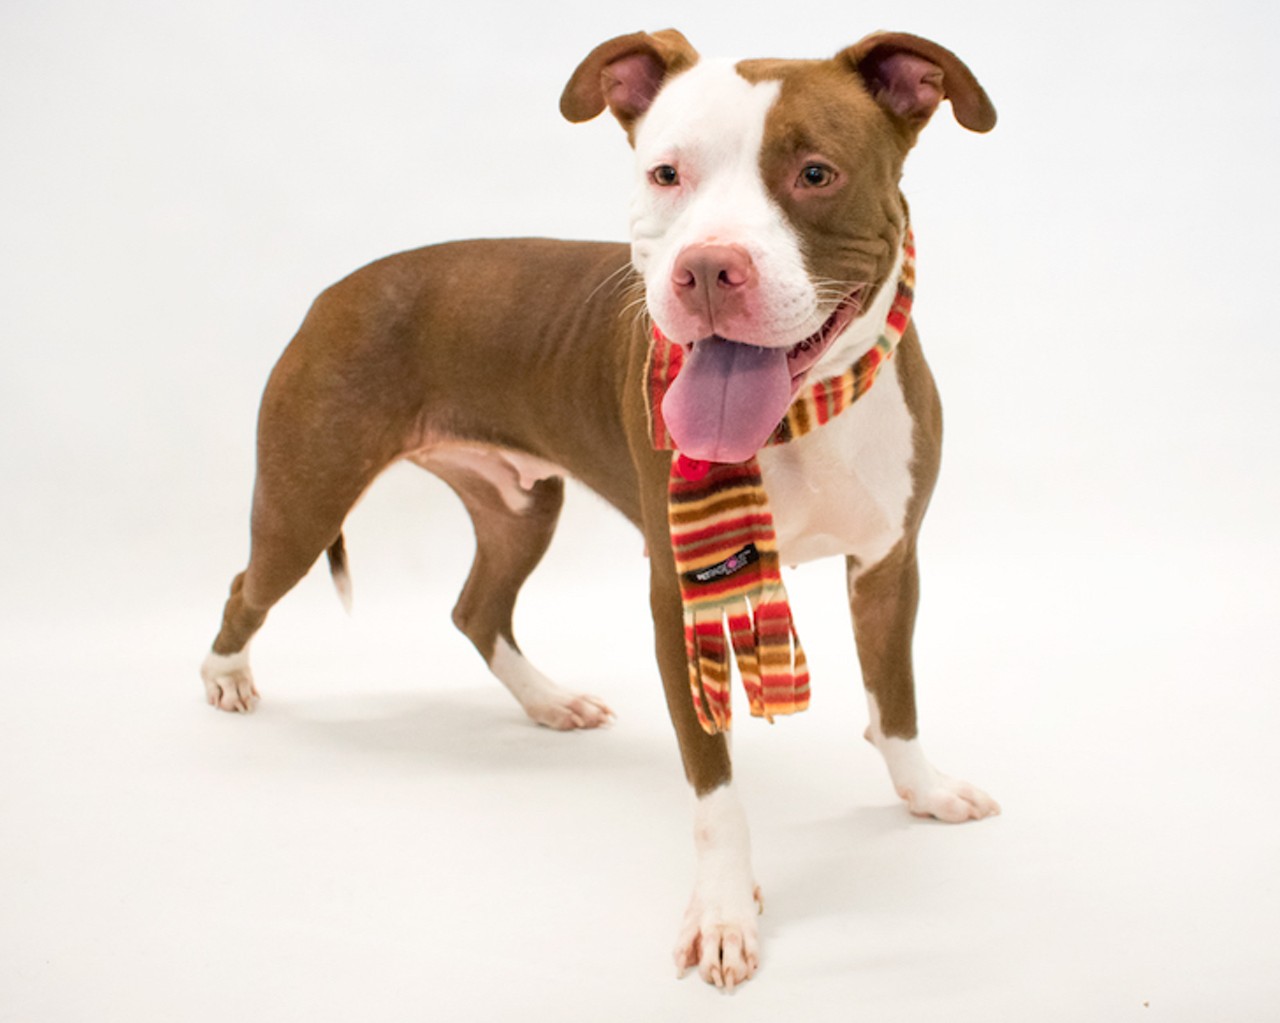 17 adoptable dogs that would love to fill your heart with Christmas cheer